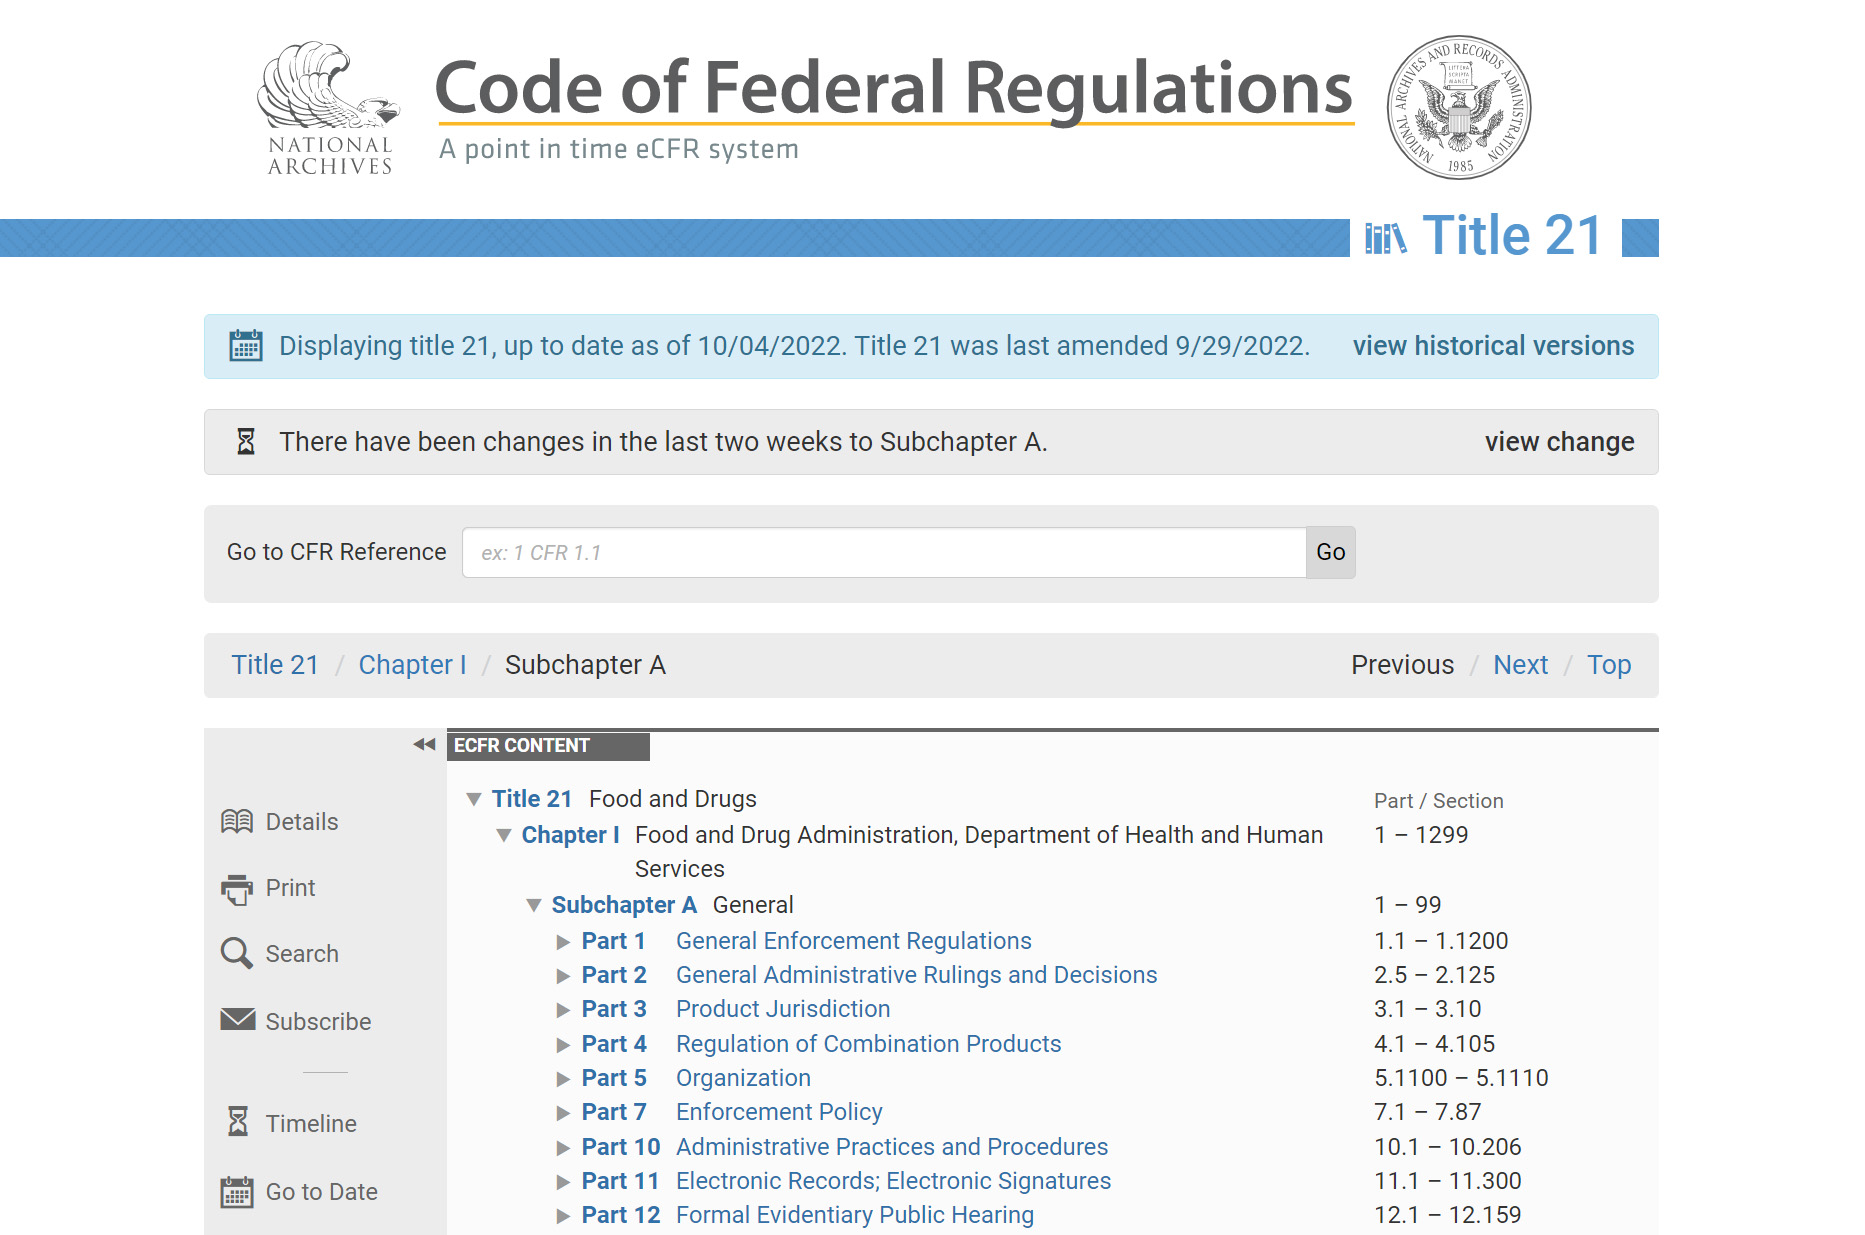 Code of Federal Regulations - Parts